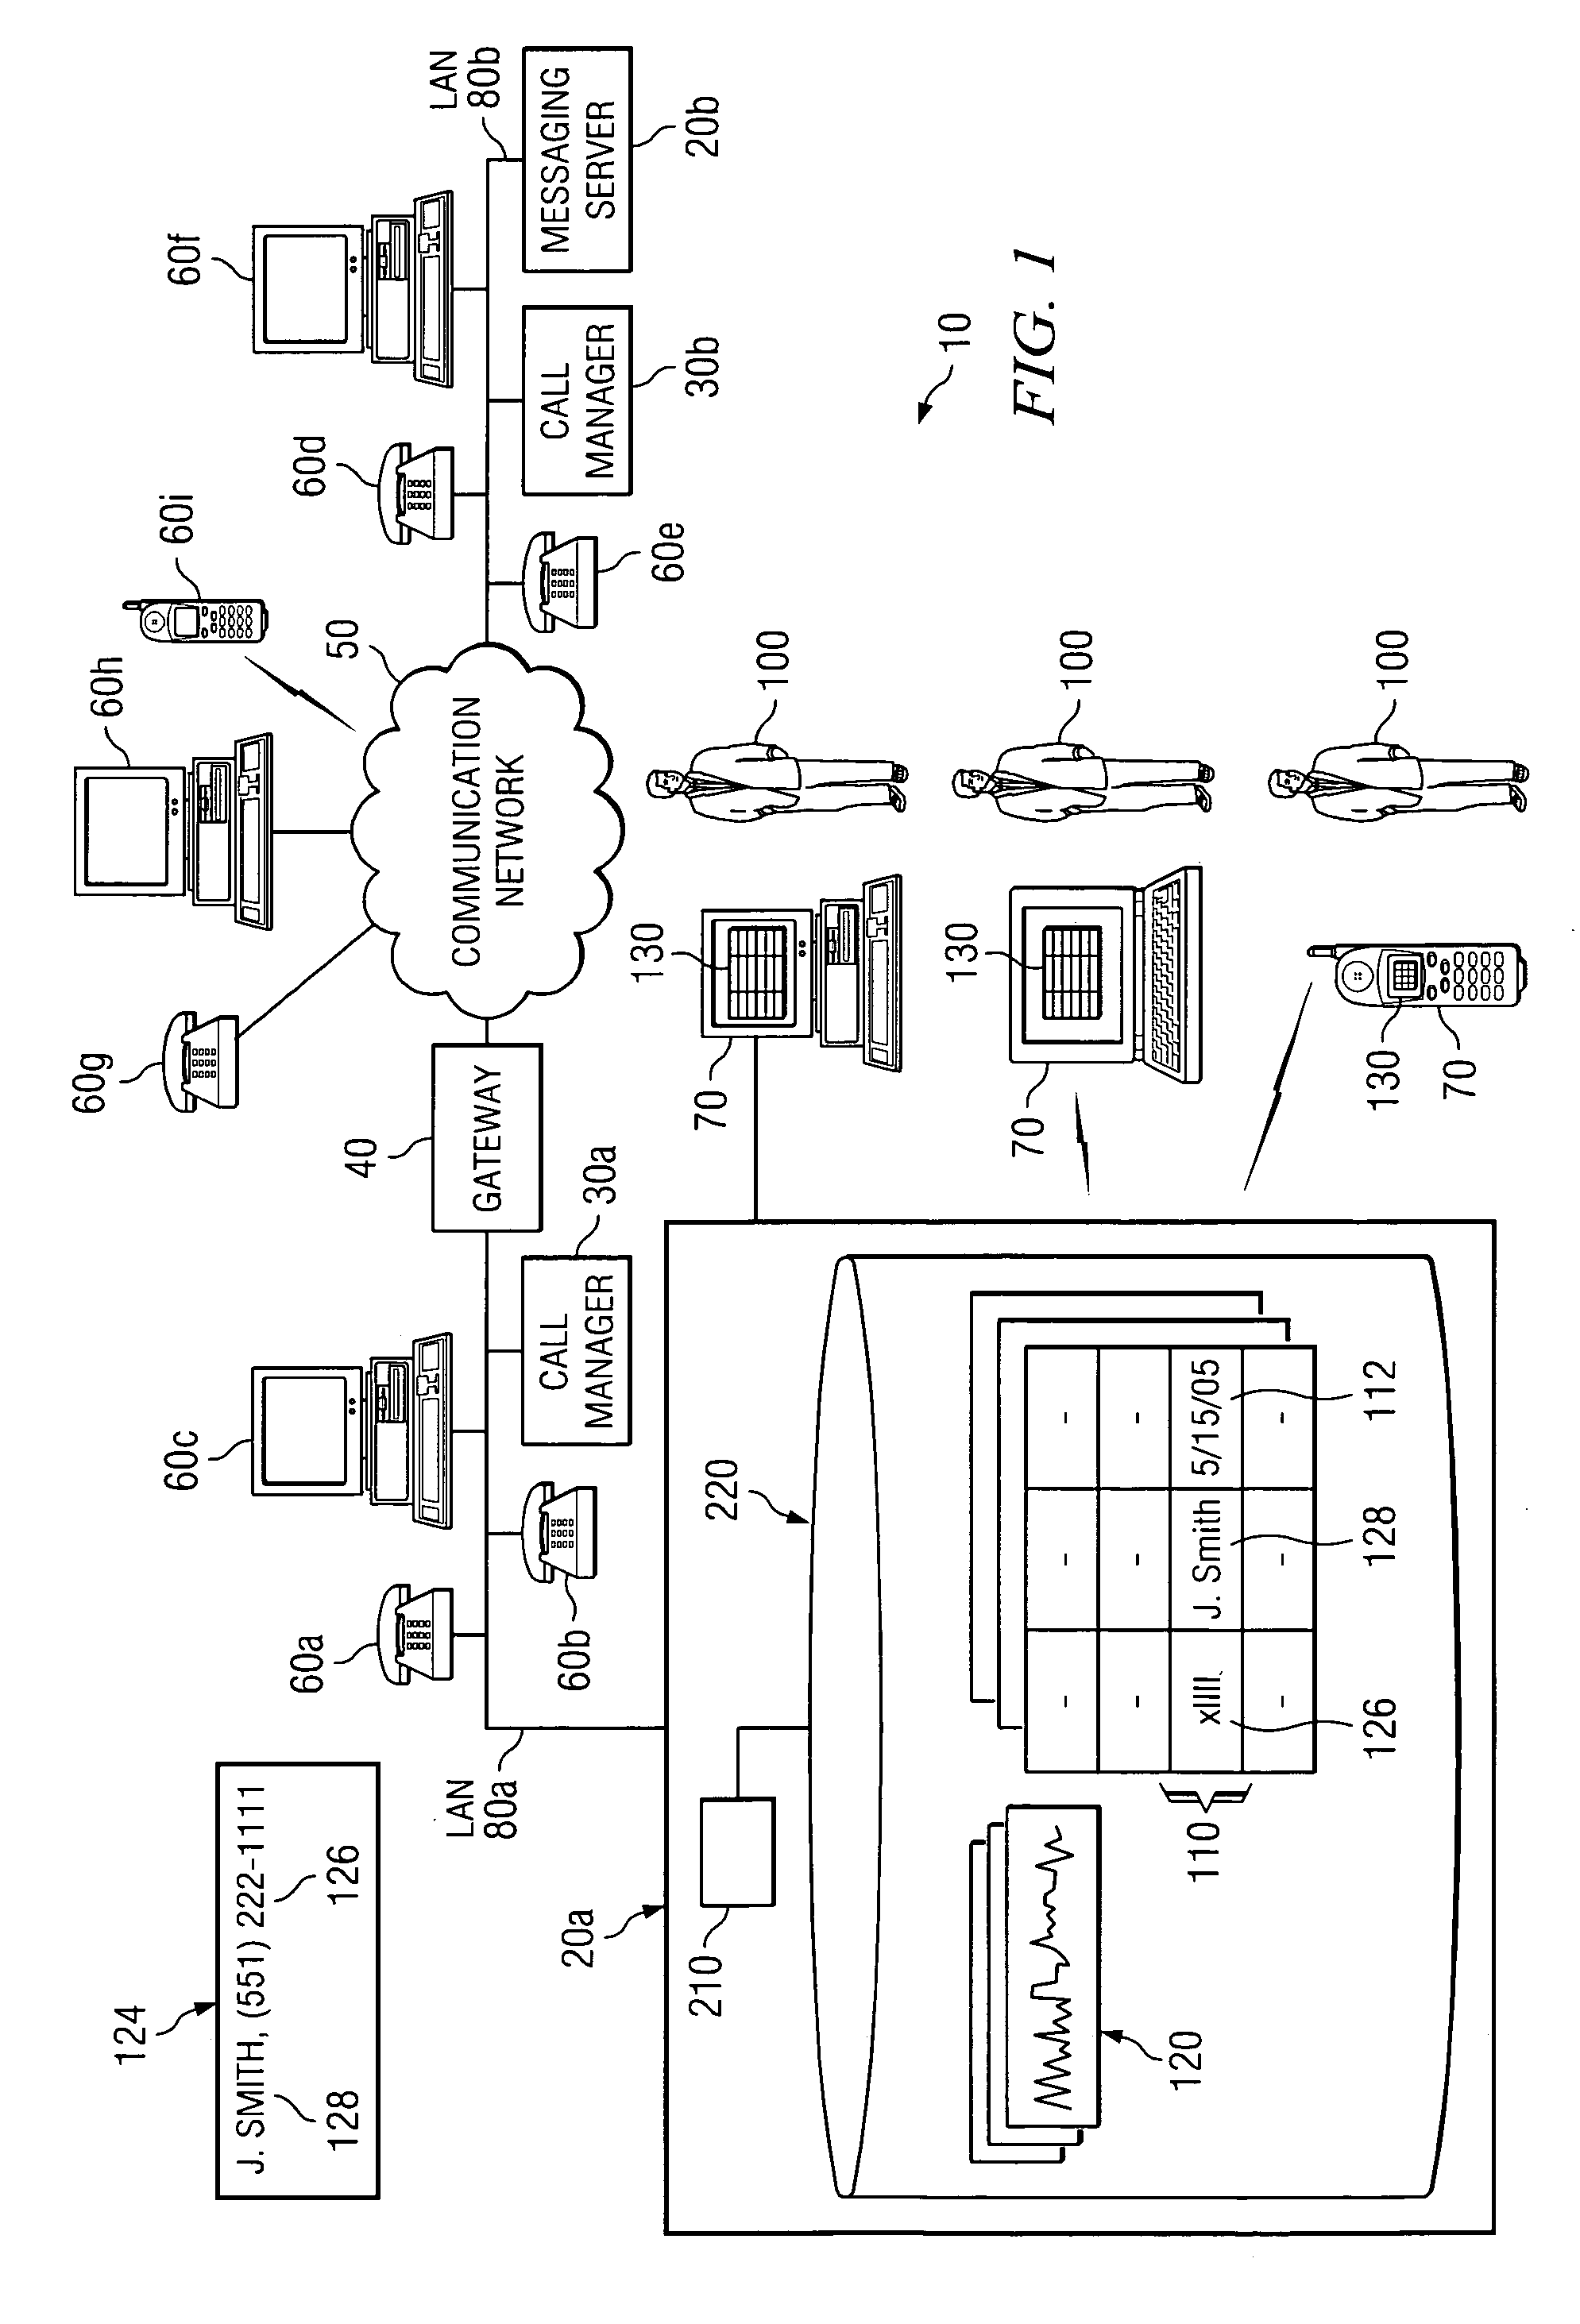 System and method for associating due dates with messages